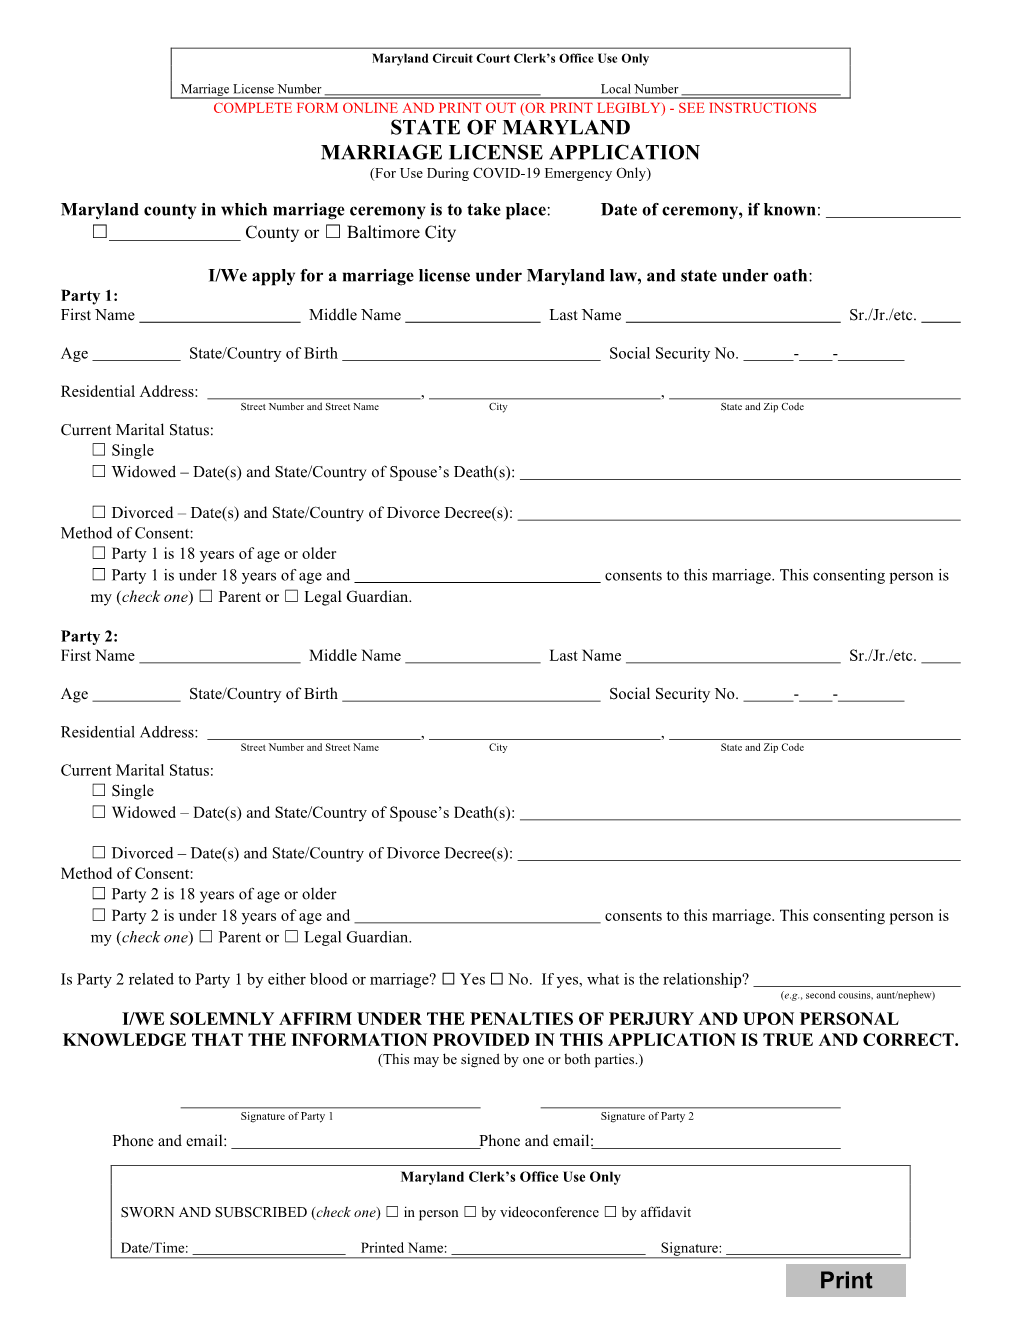 MARRIAGE LICENSE APPLICATION (For Use During COVID-19 Emergency Only)